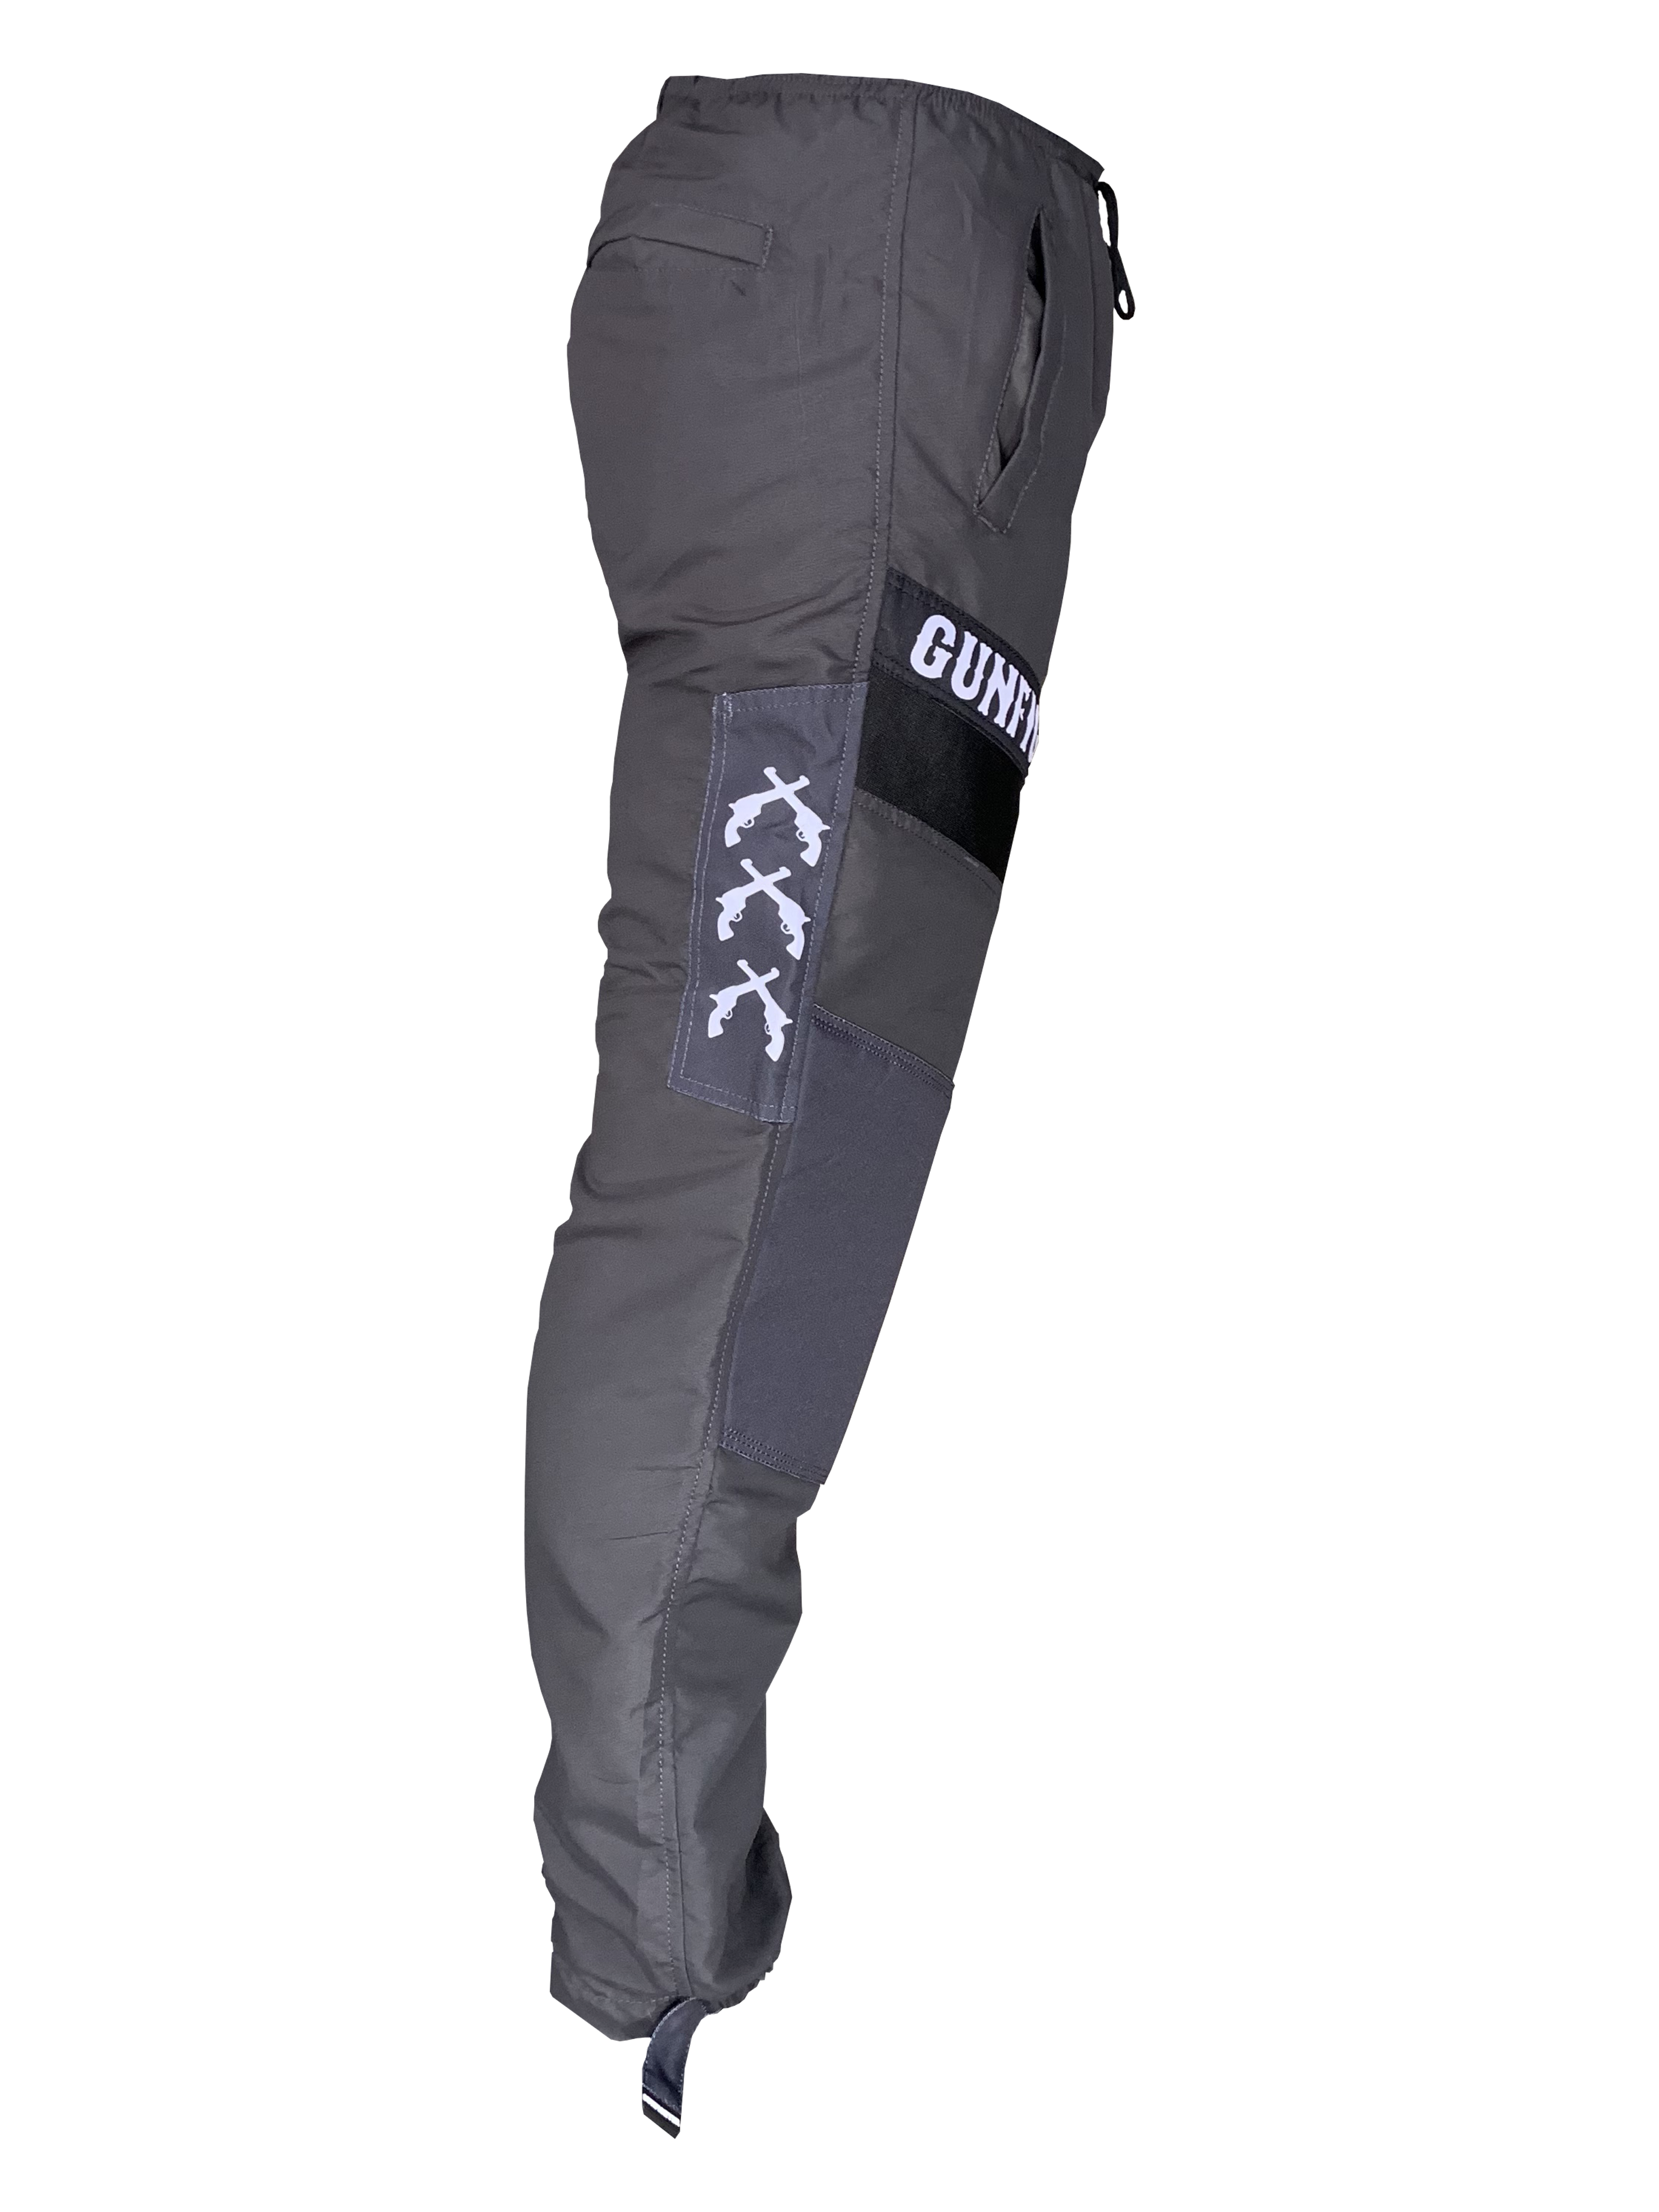 Gunfighter Sports OUTLAW Jogger - Charcoal